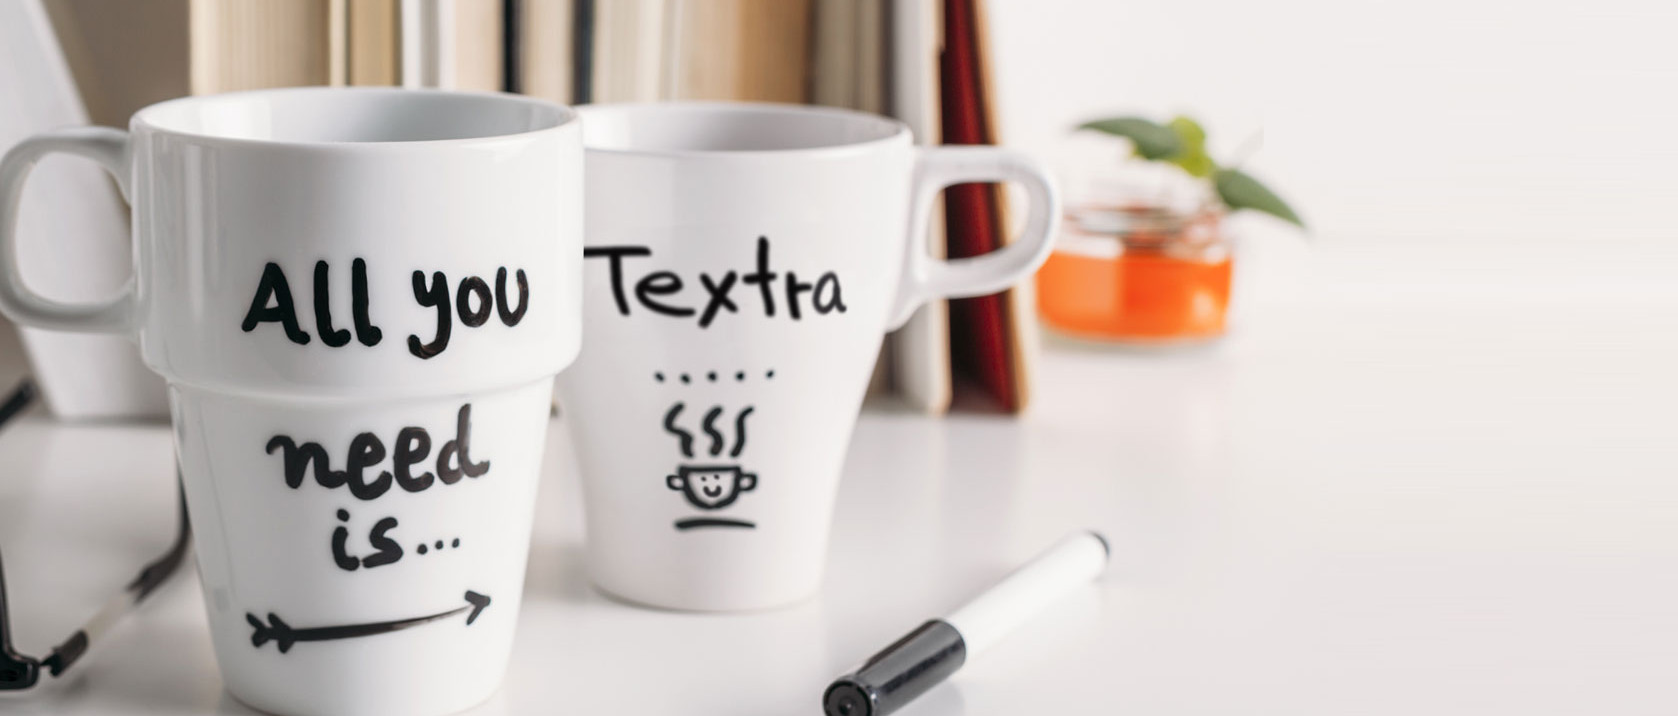 Two coffee mugs on a desk with the caption: "all you need is Textra" written on them.